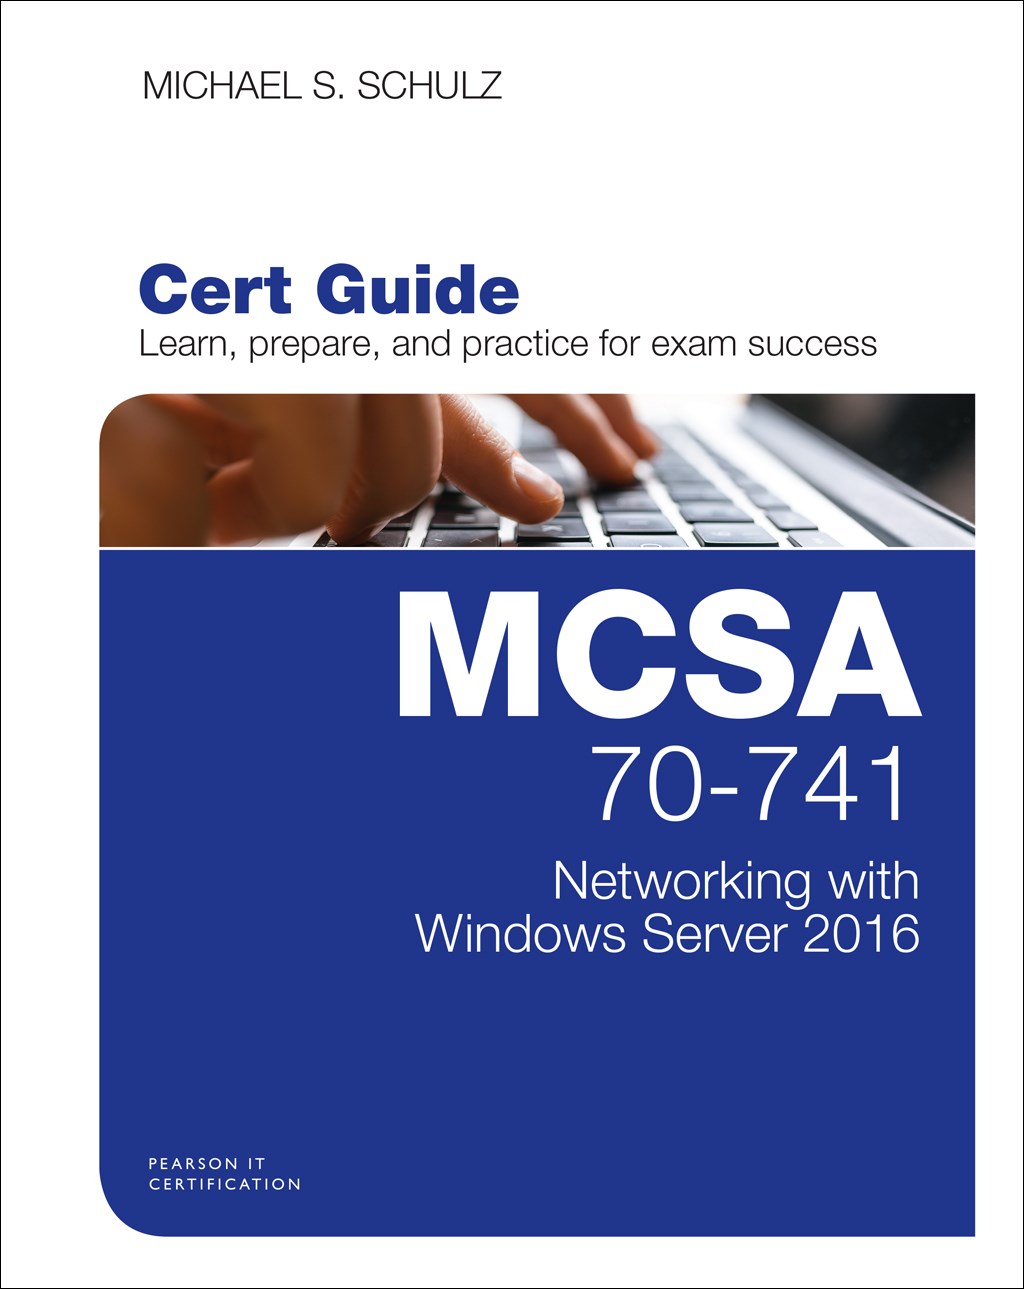 MCSA 70-741 Cert Guide: Networking with Windows Server 2016, Rough Cuts